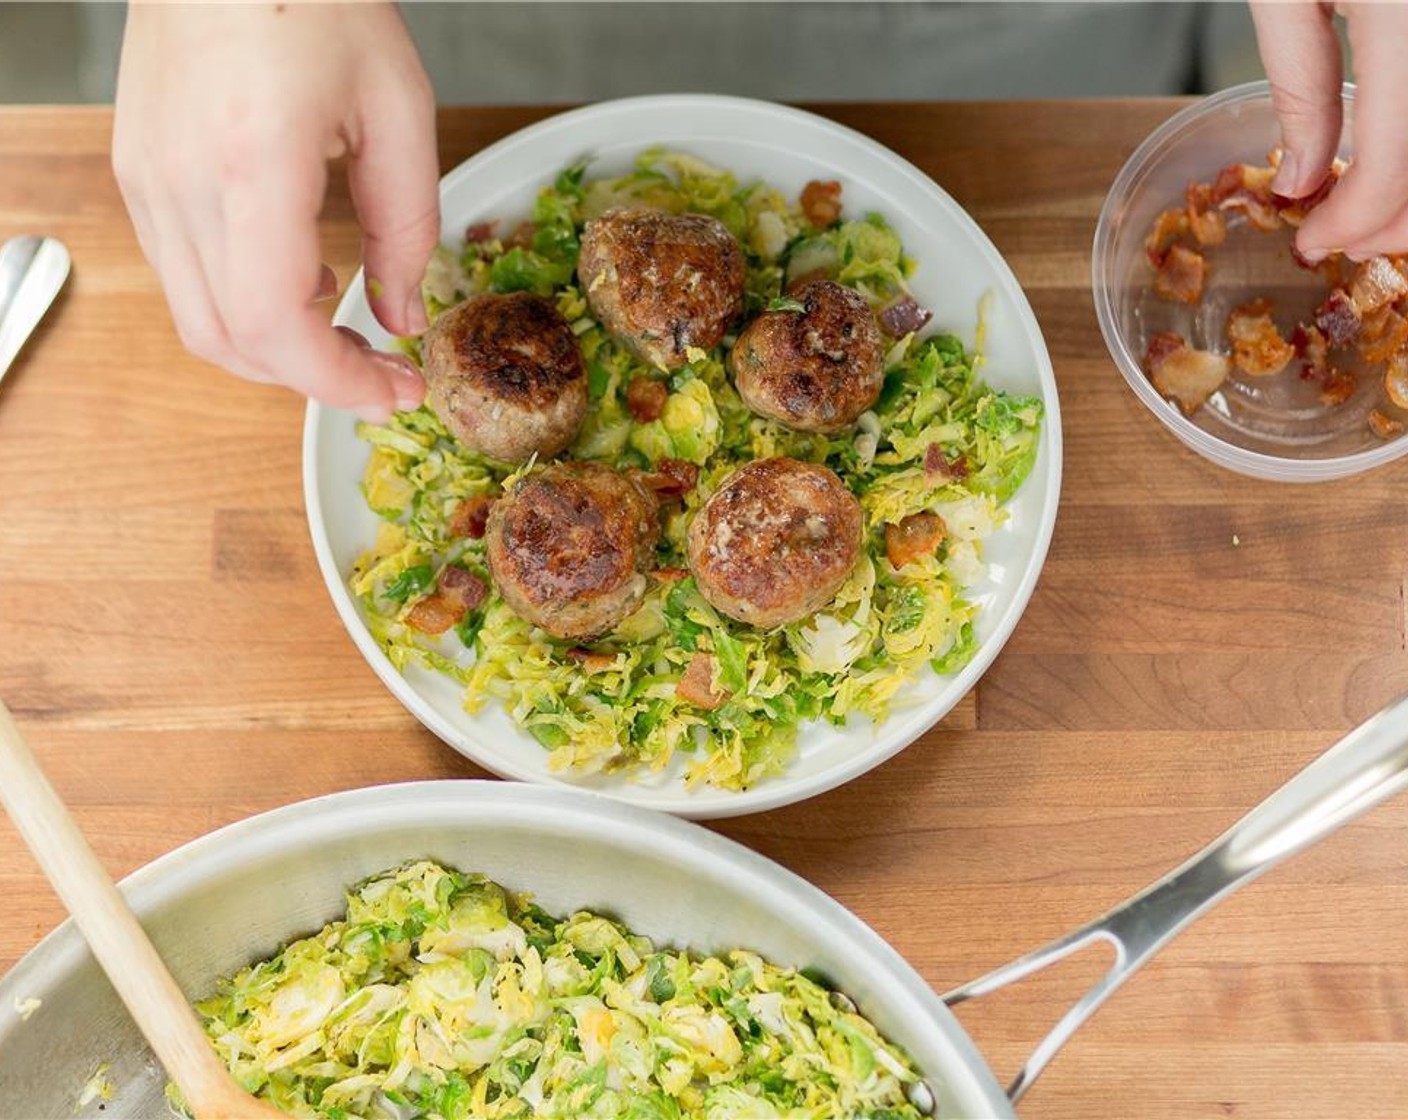 step 13 Toss the cooked bacon with the Brussels sprouts. Divide the Brussels sprouts between two plates at top center of plate. Divide the meatballs and plate alongside the front of Brussels sprouts. Drizzle sauce over each meatball for both plates.